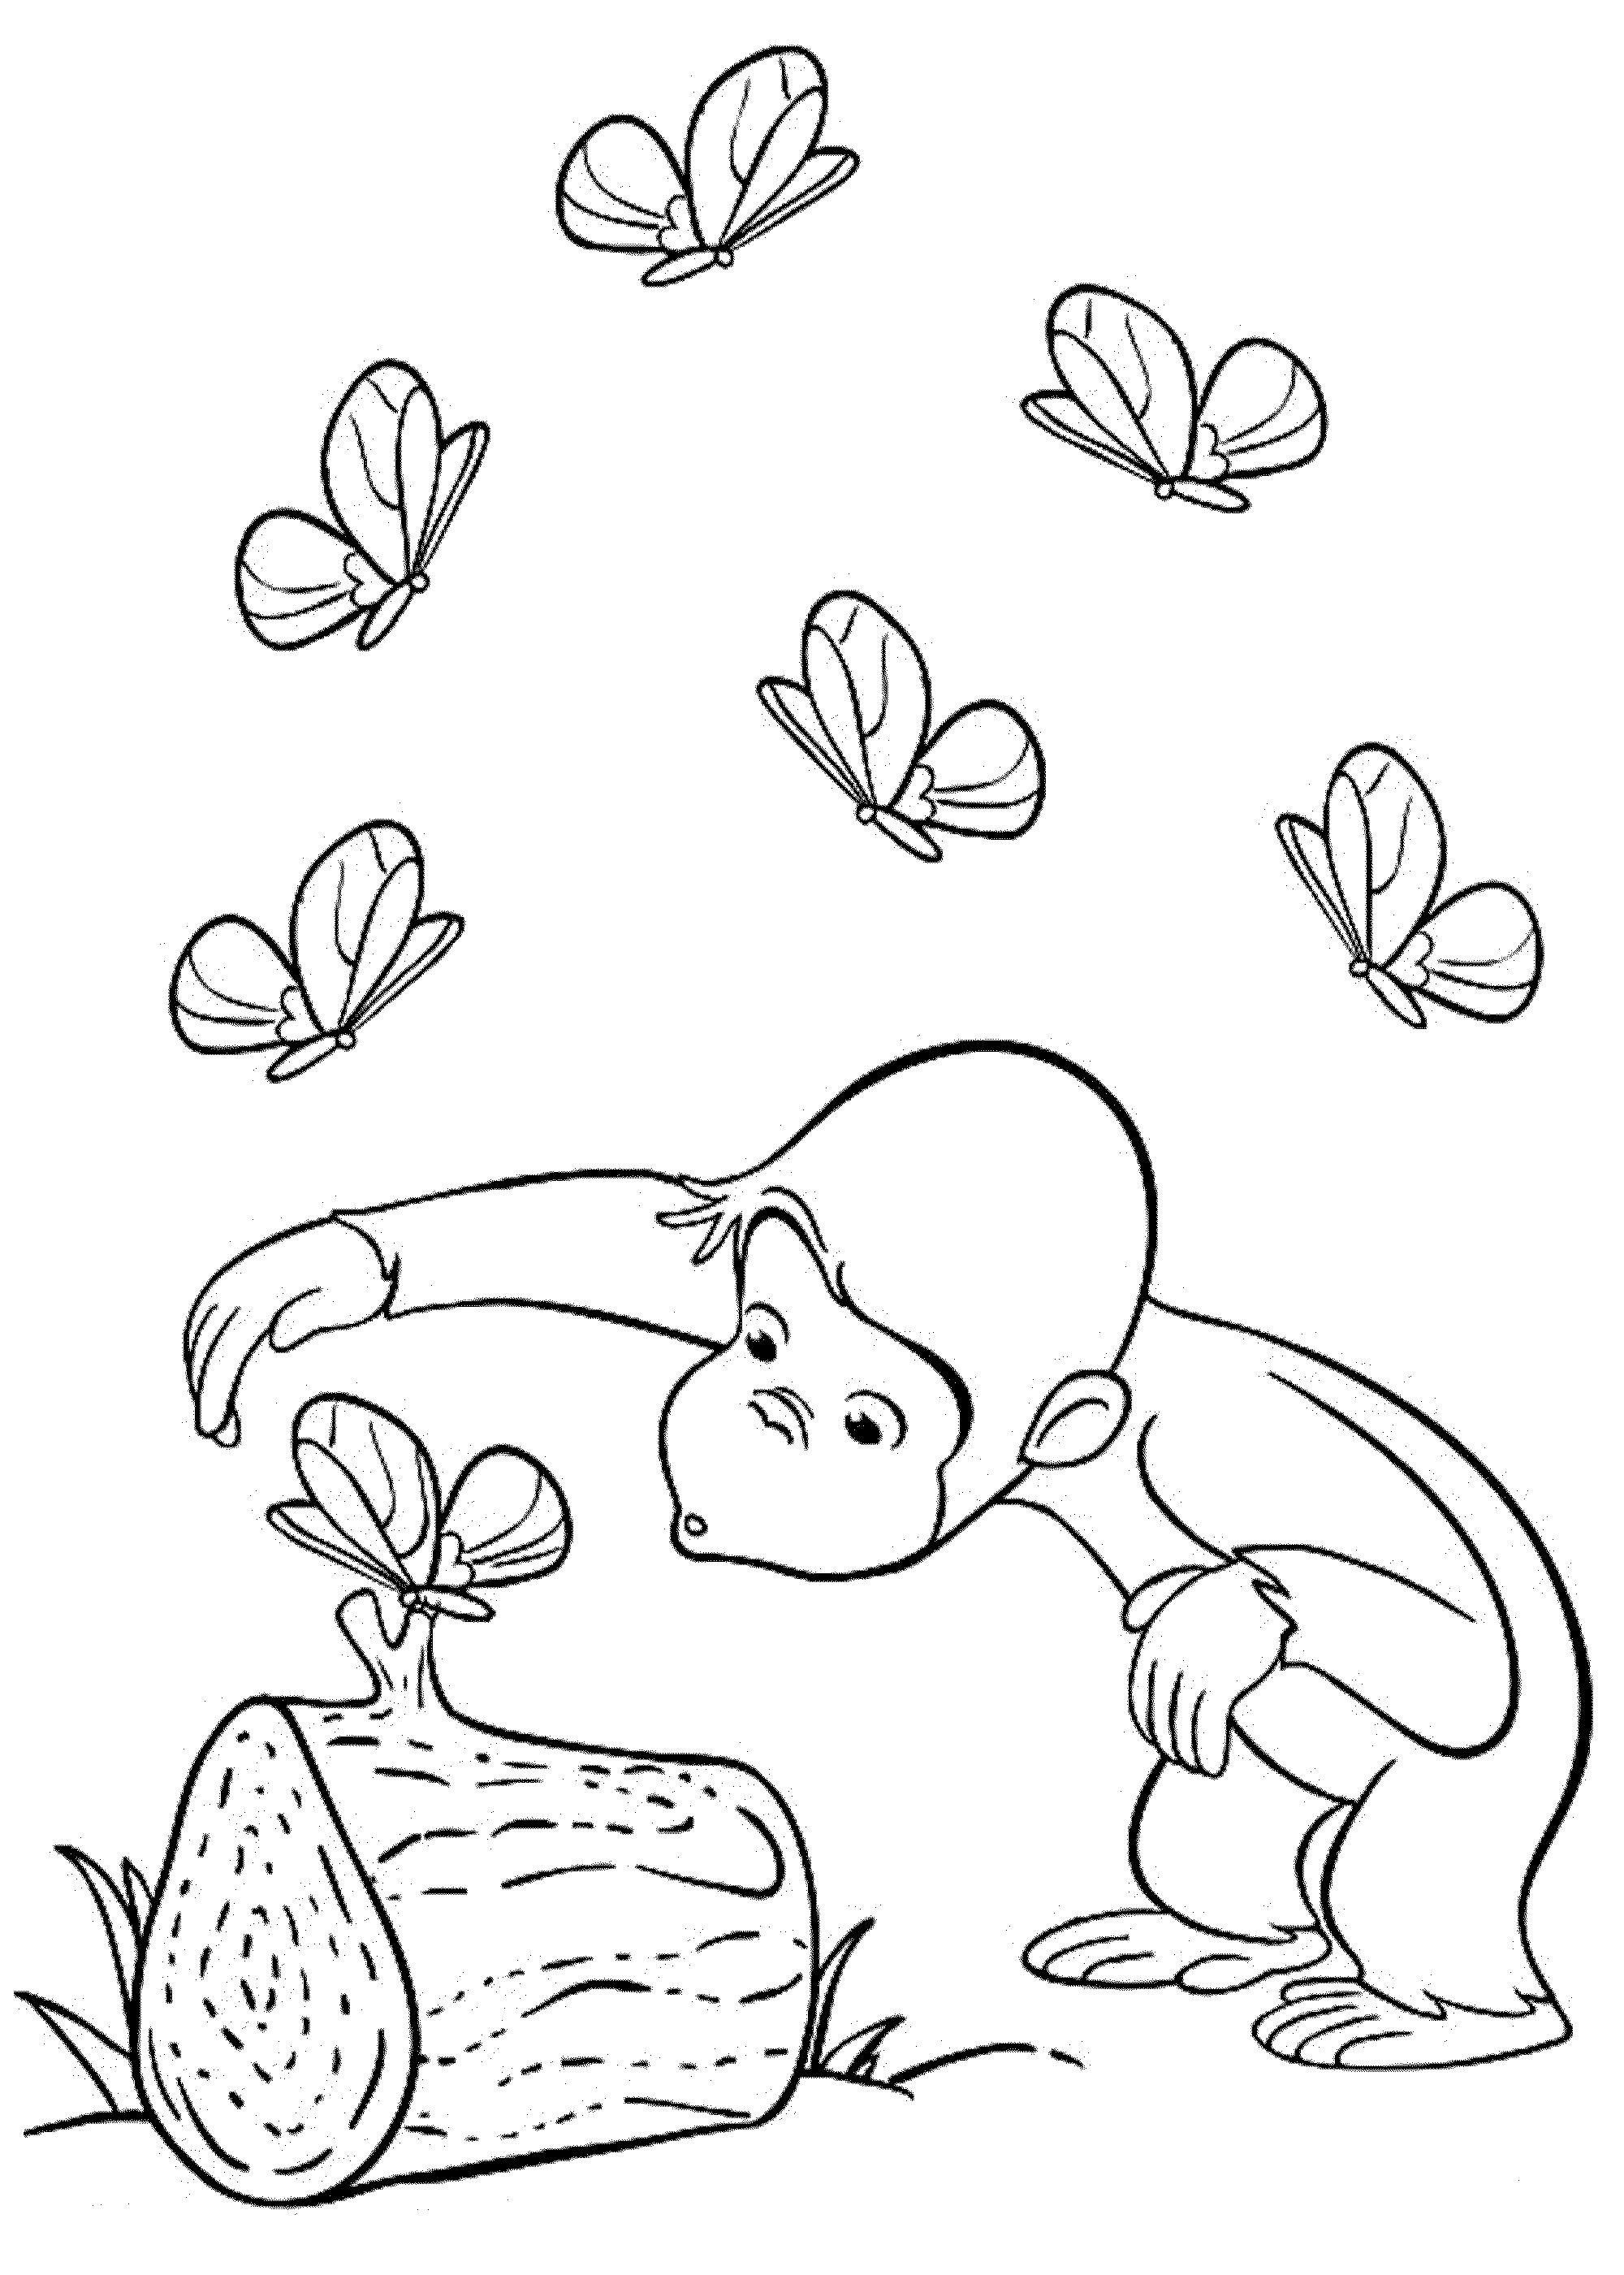 childrens coloring sheets free cartoon coloring pages kids cartoon coloring pages coloring sheets childrens 